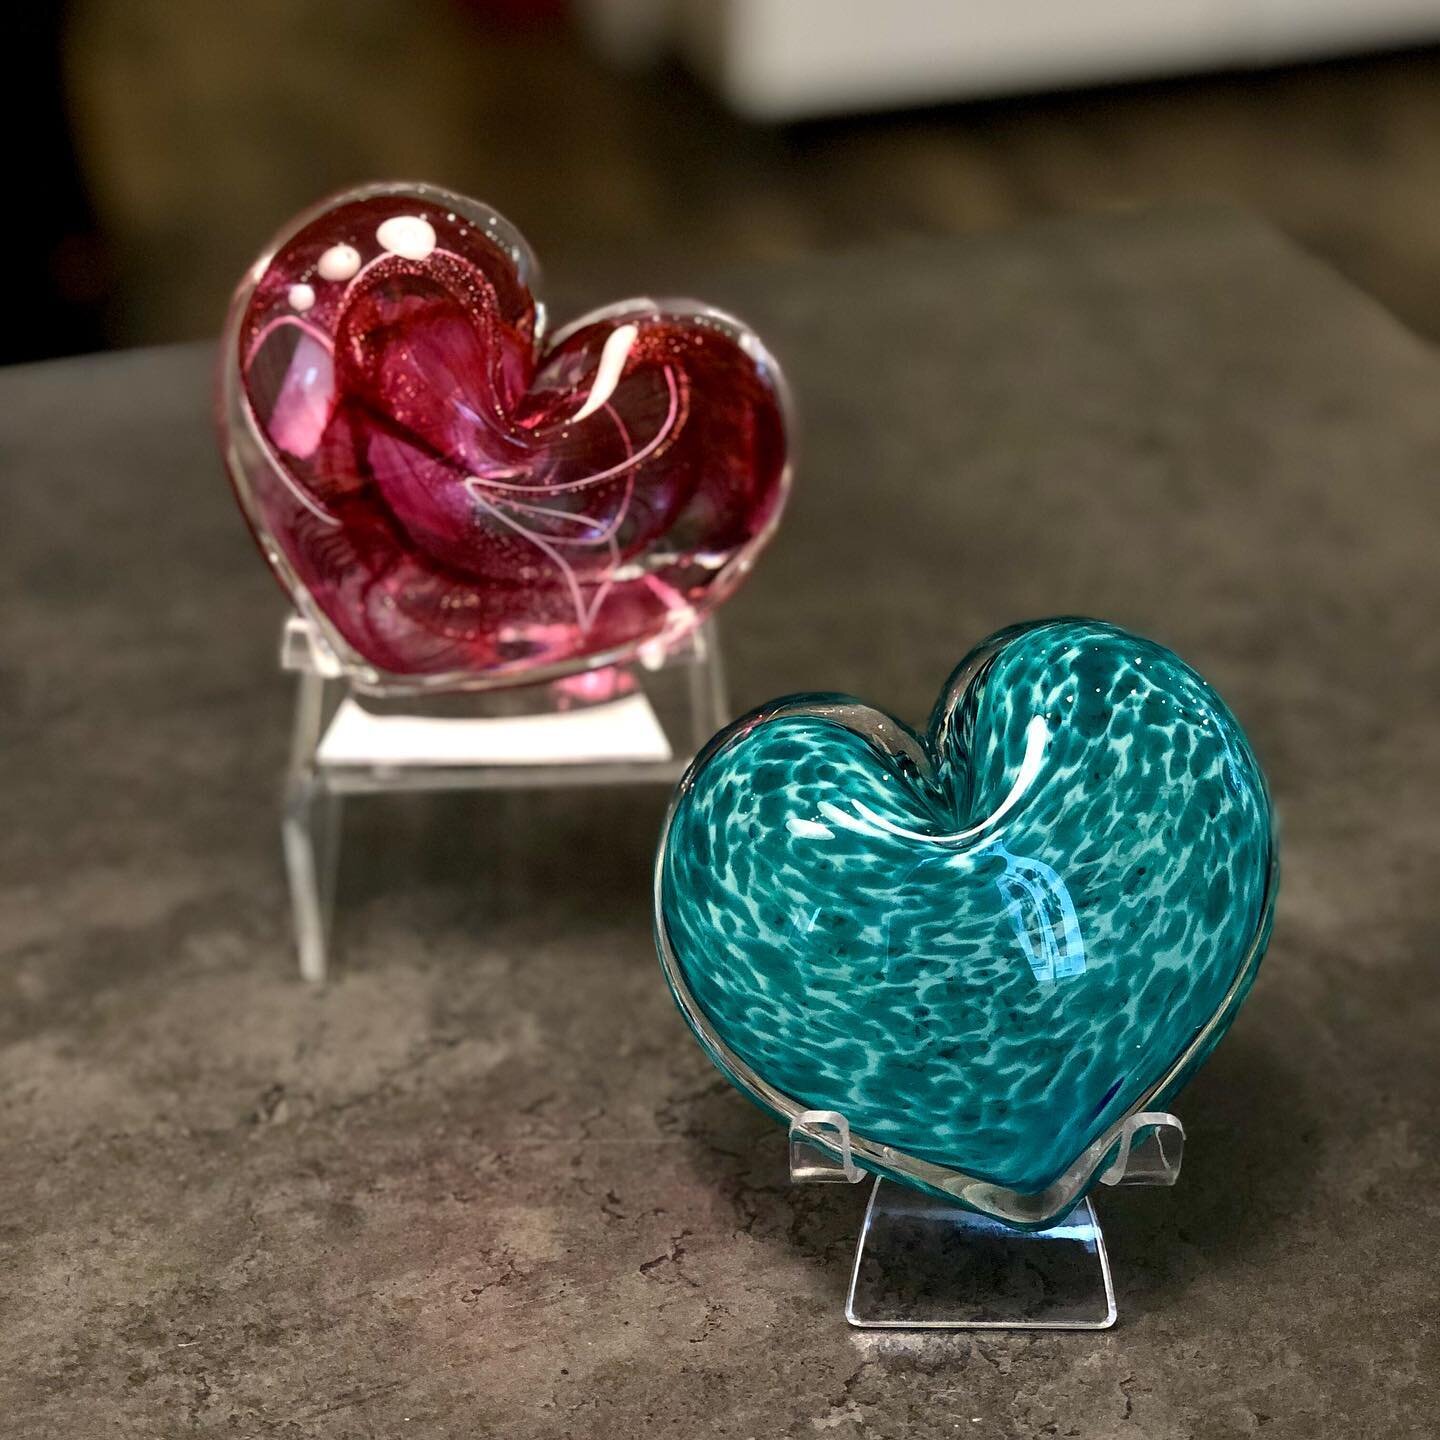 Just because you left your ❤️ in SF doesn&rsquo;t mean you can&rsquo;t get your special someone a valentines! We have an assortment of decorative paperweights and trinket trays!! 

#sanfrancisco #localartists #shoplocal #haightandashbury #haightst #s